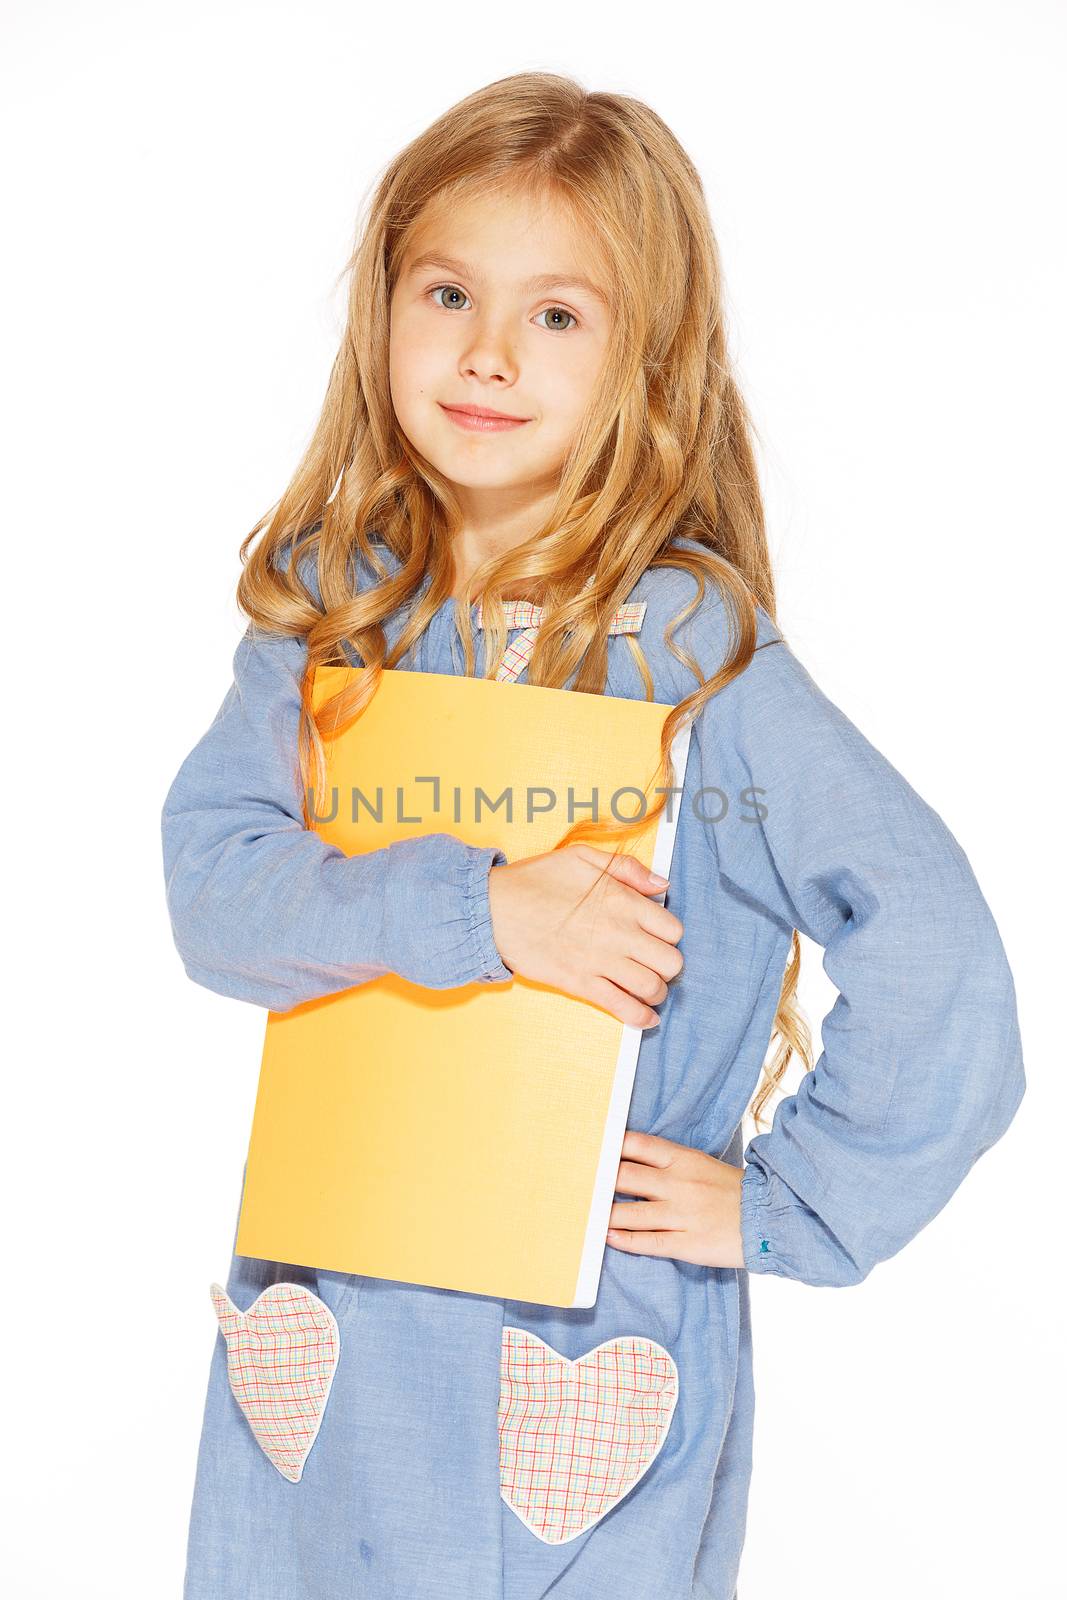 Beautiful girl with copybook by gorov108